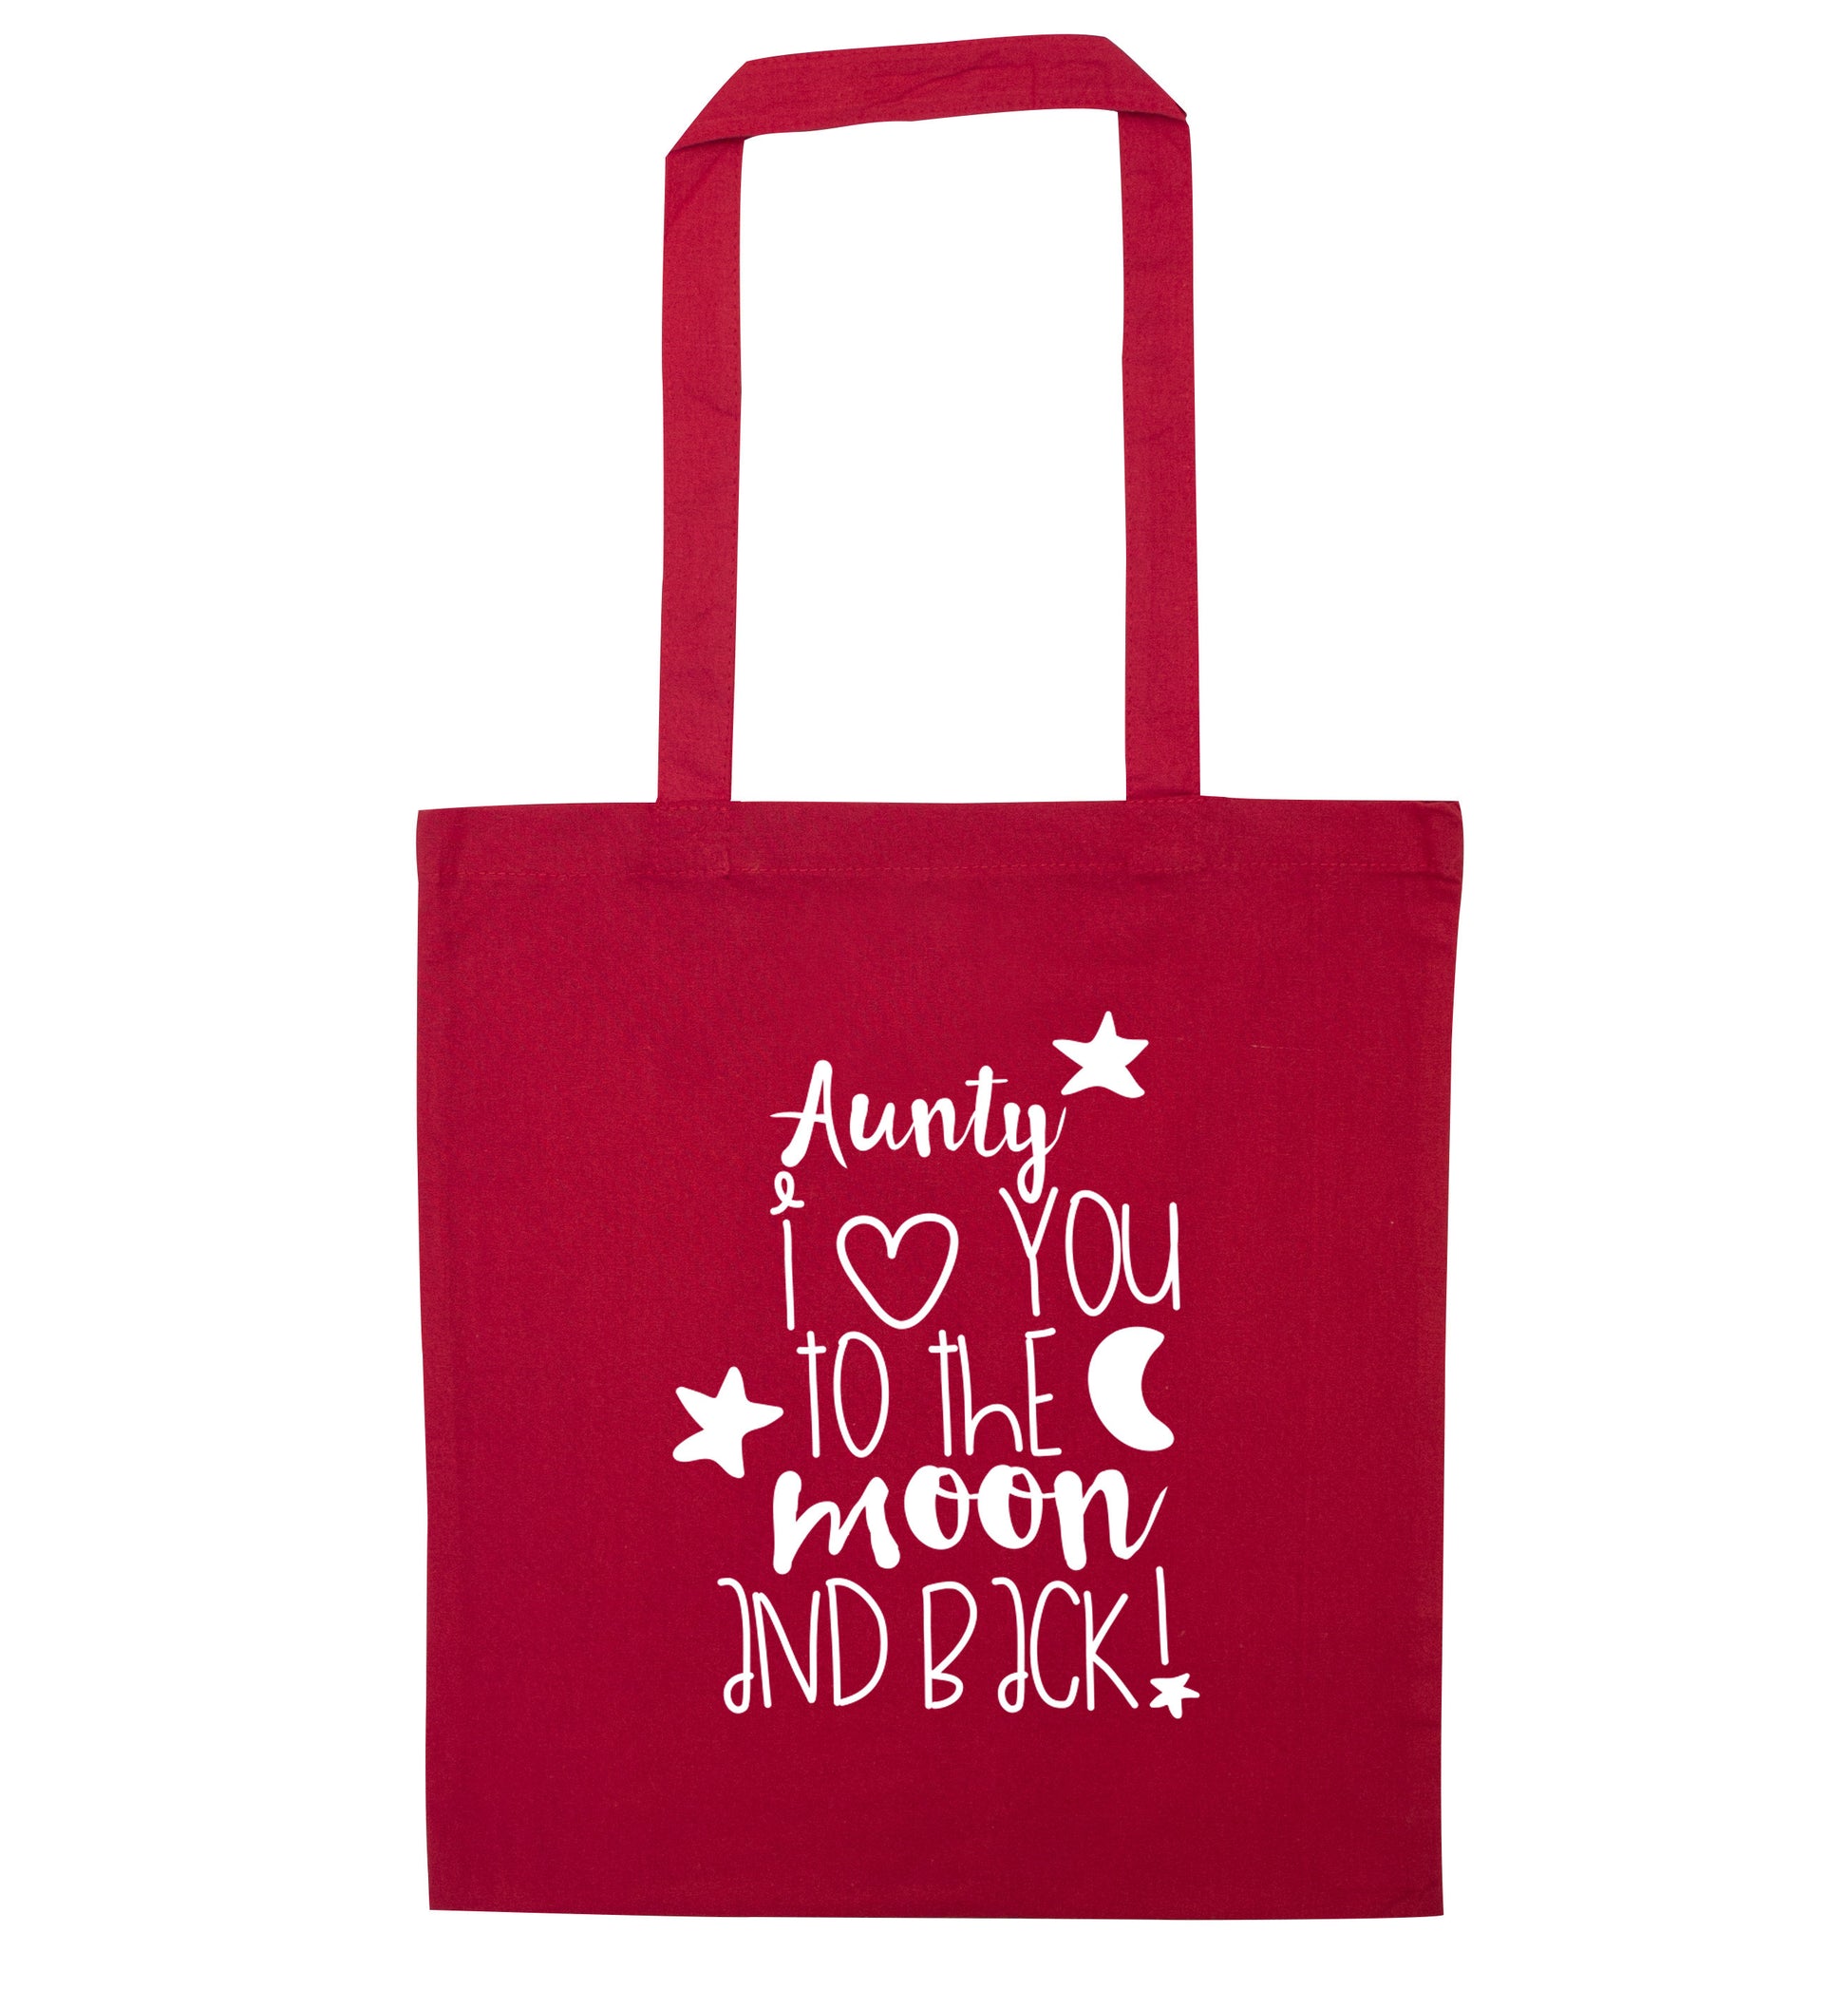 Aunty I love you to the moon and back red tote bag